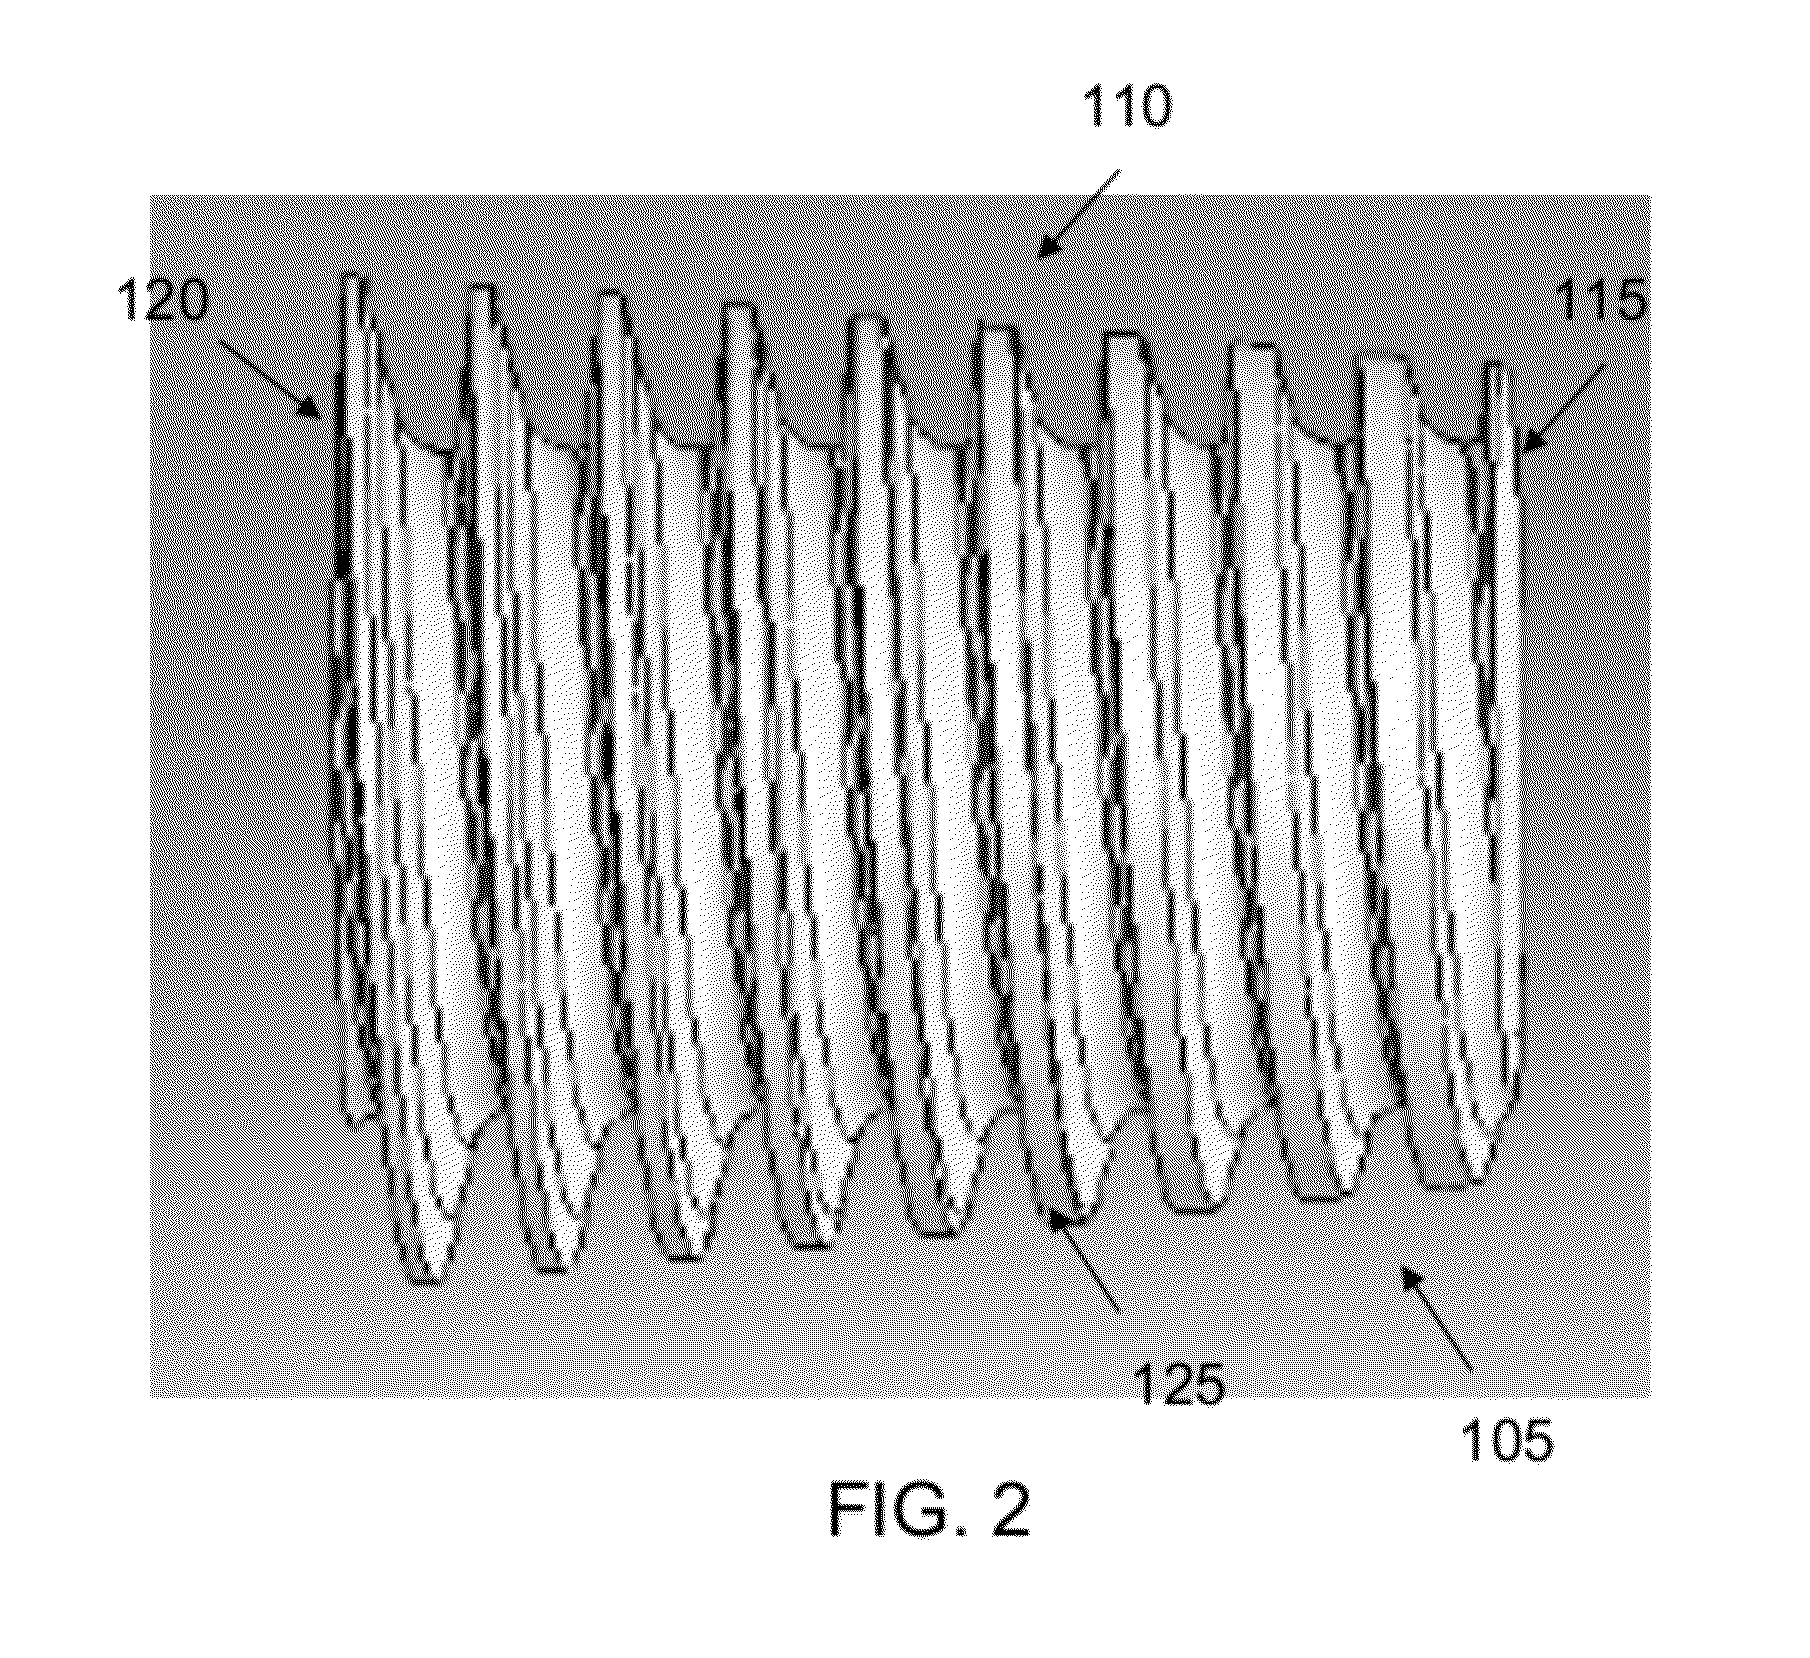 Method and apparatus for performing an open wedge osteotomy